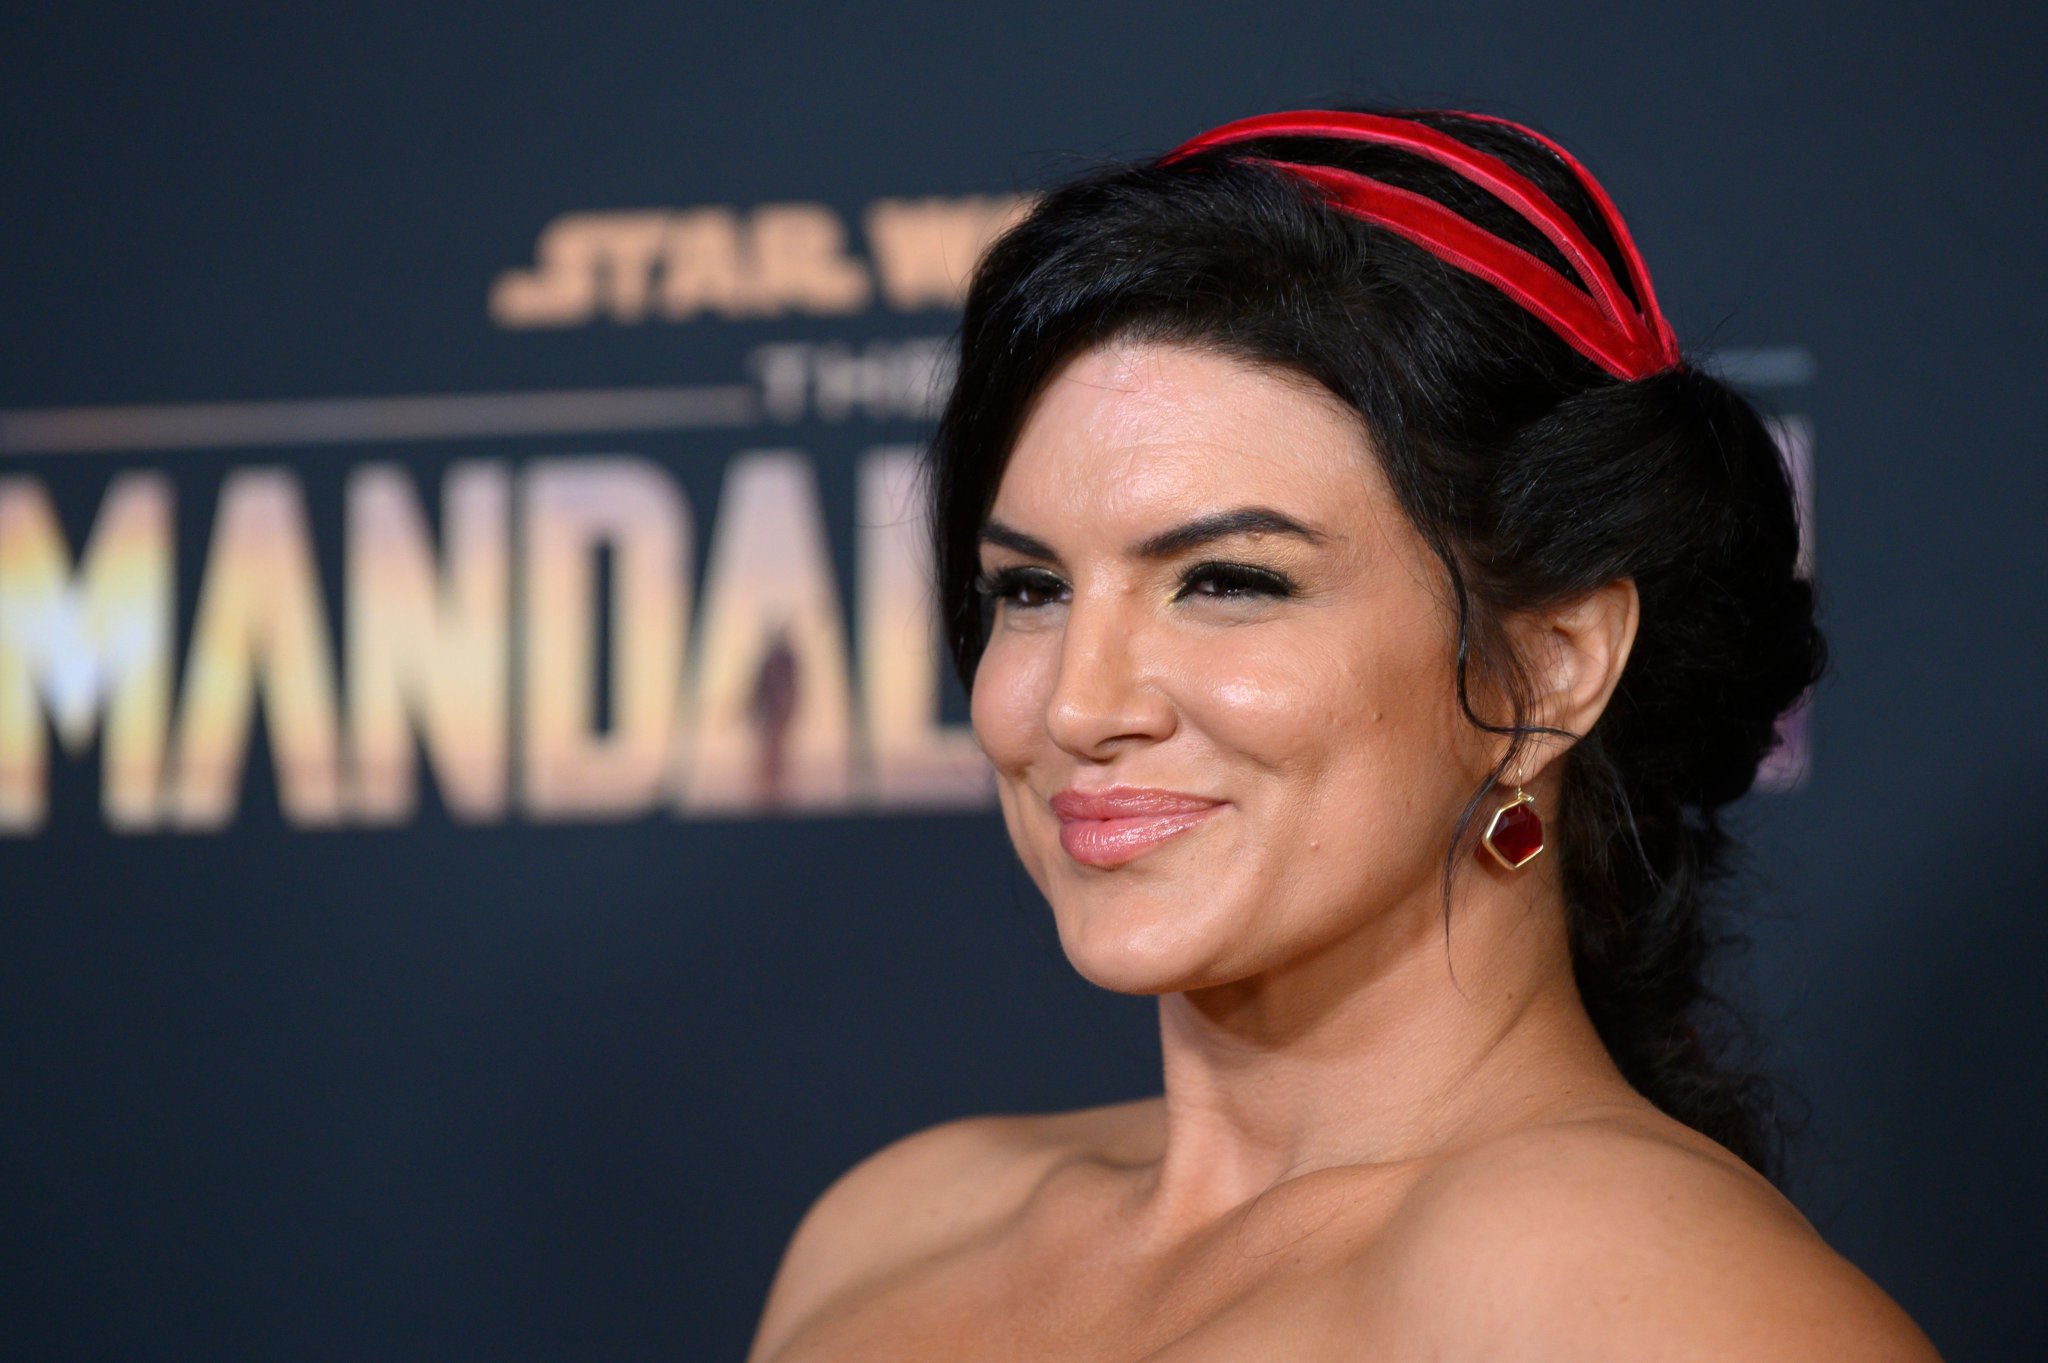 Gina Carano Fired From 'Star Wars: The Mandalorian' Over Controversial Social Media Posts